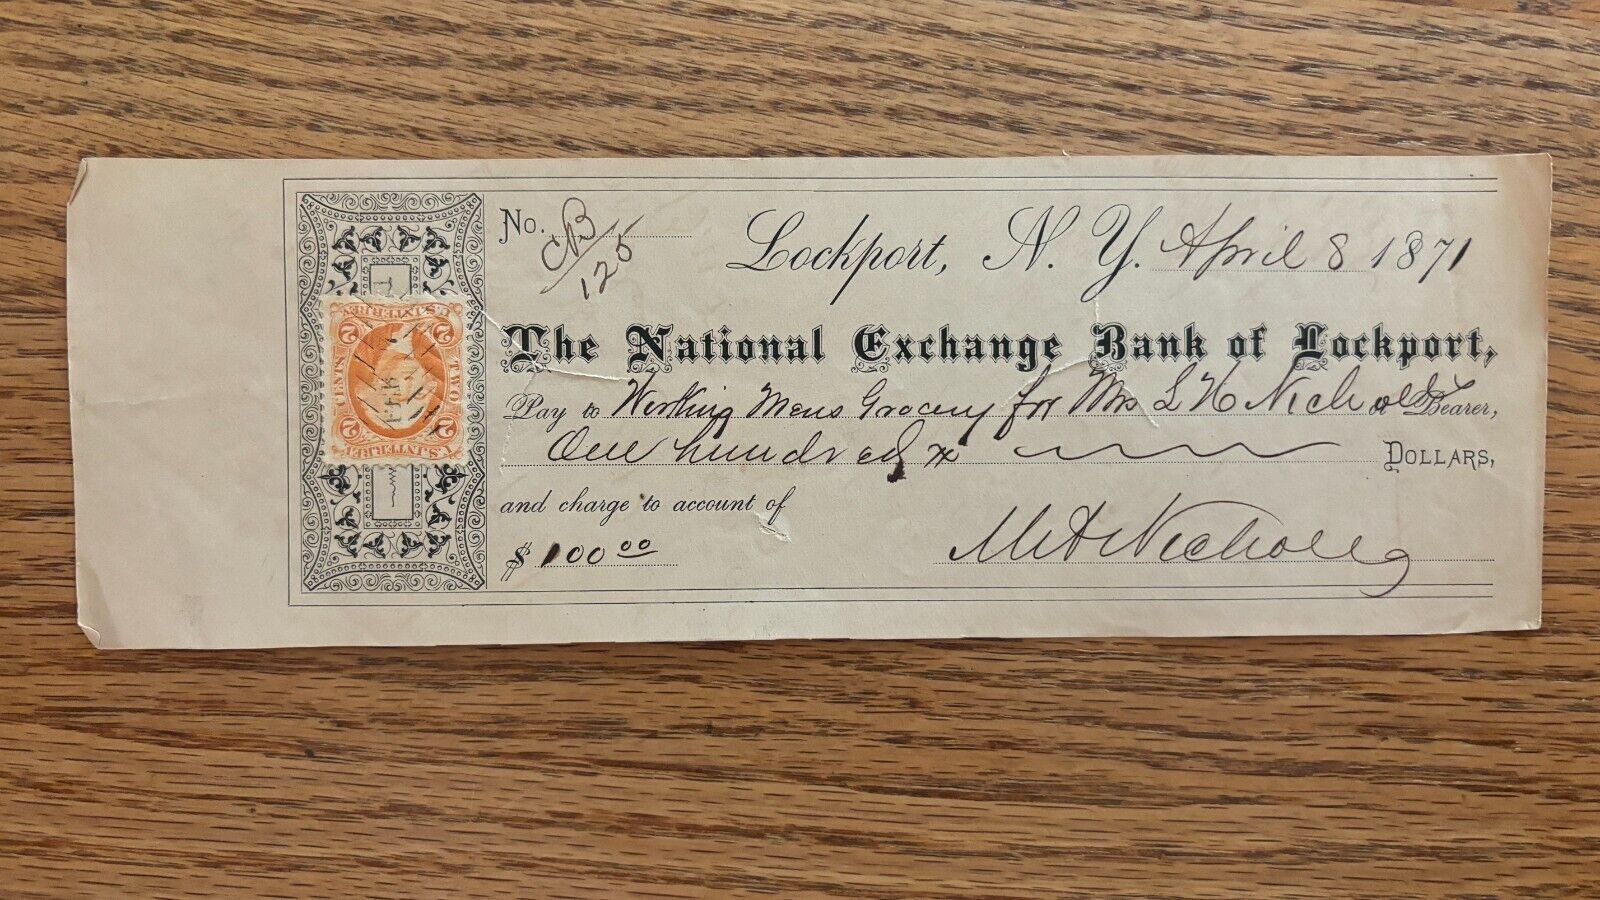 The National Exchange Bank of Lockport 1871 Check w/ Revenue Stamp